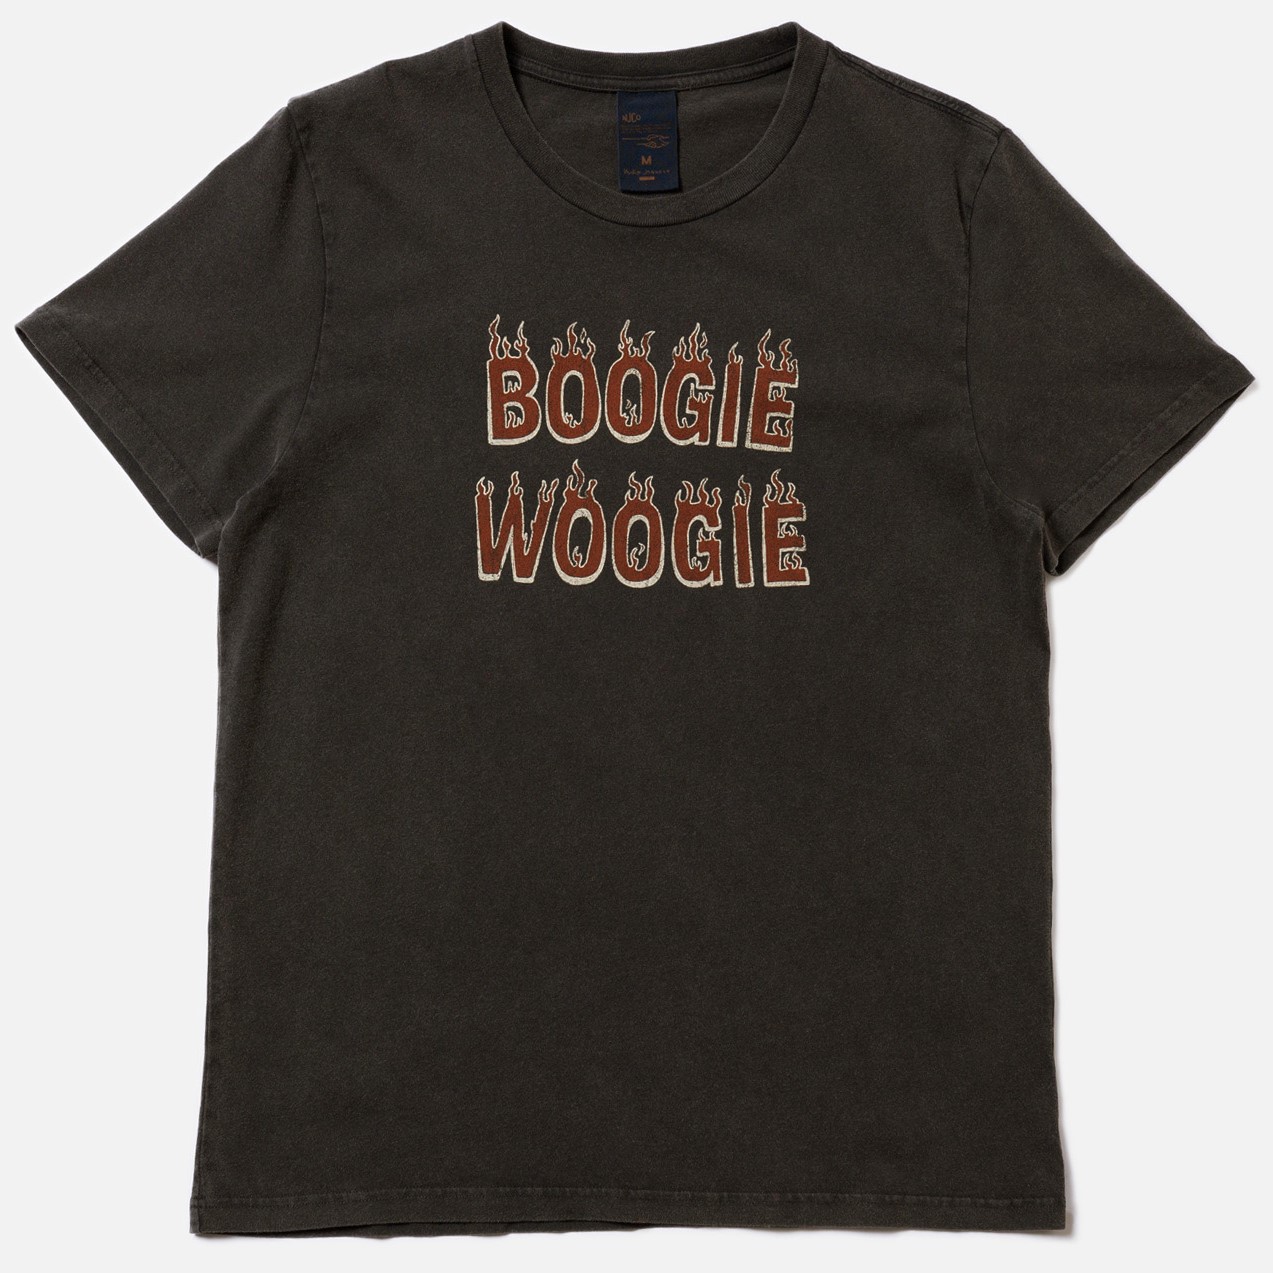 T-Shirt Roy Boogie Antracite